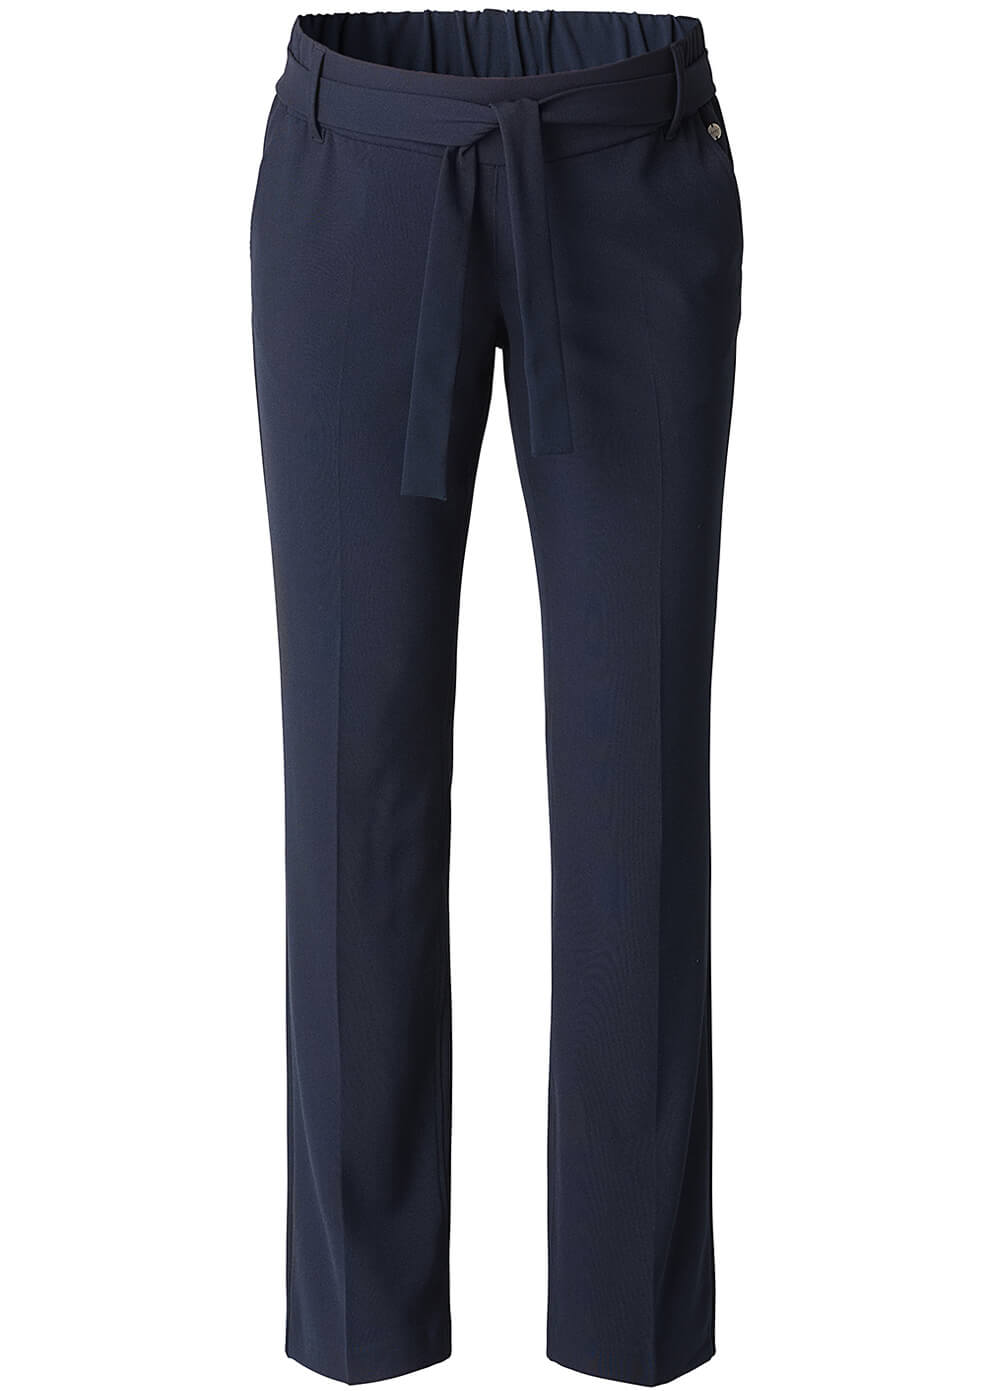 Belted Navy Straight Leg Maternity Trousers by Esprit